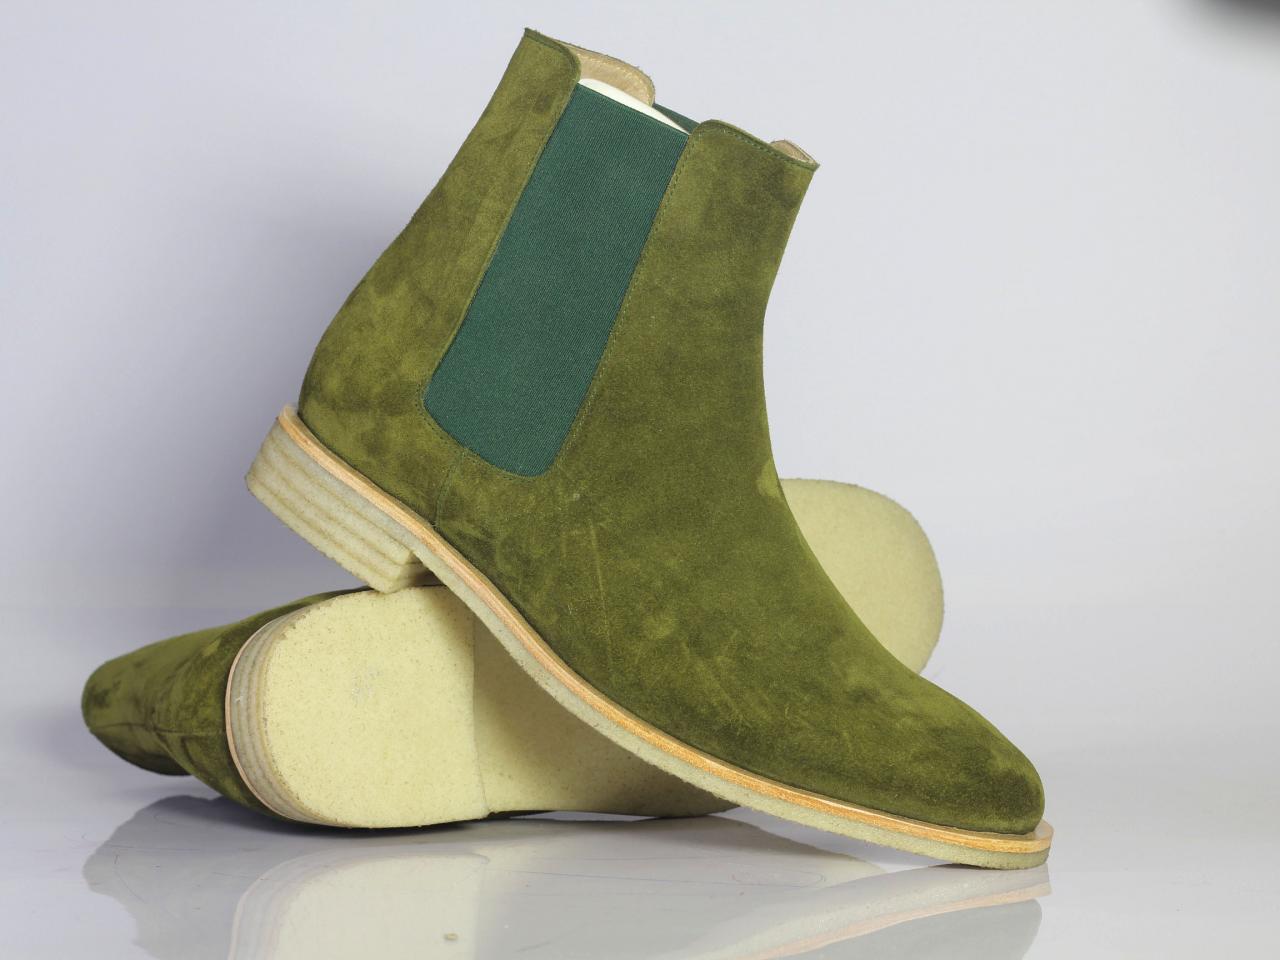 green suede boots mens